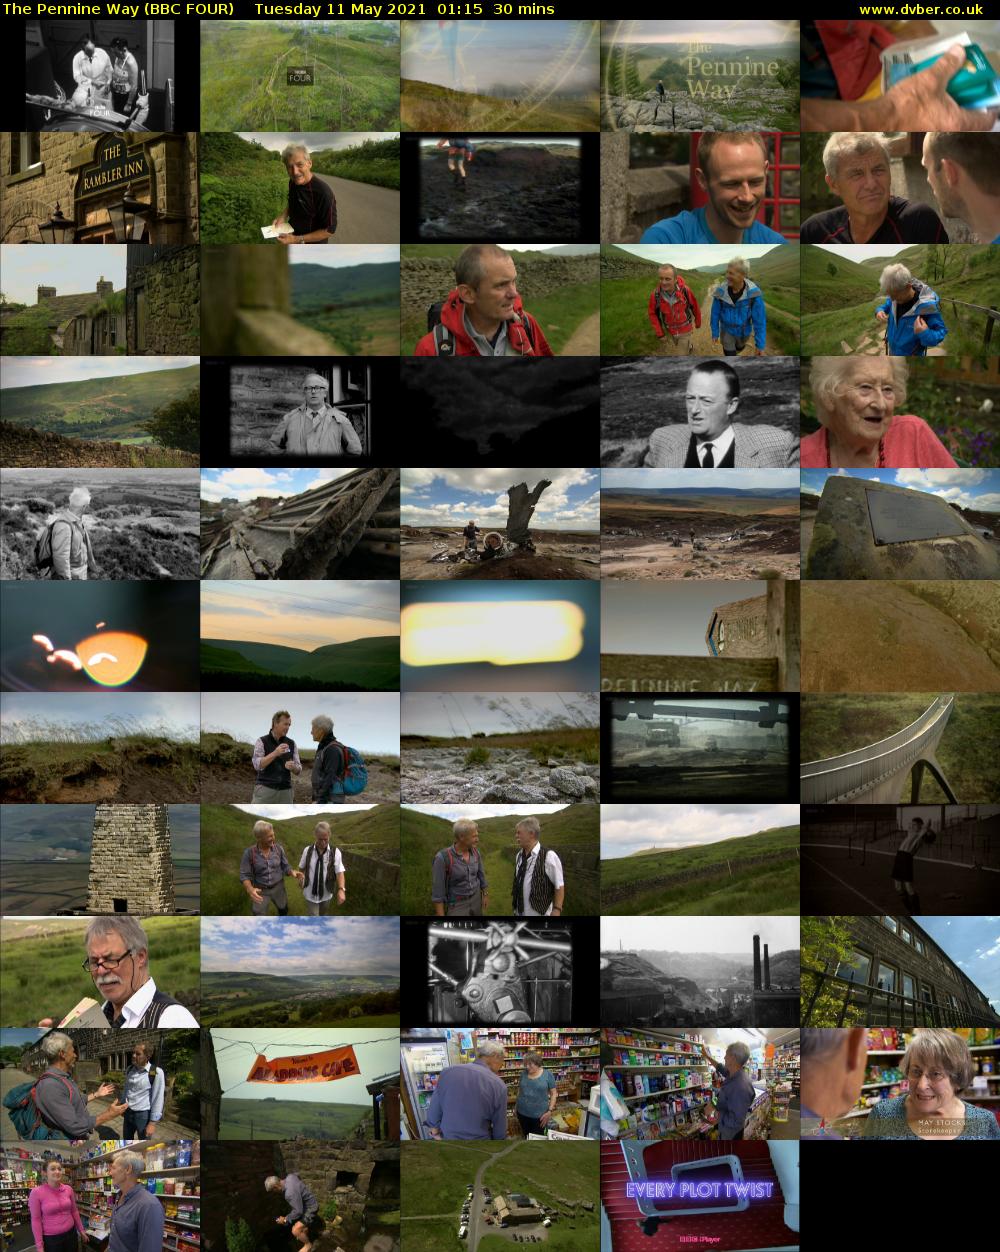 The Pennine Way (BBC FOUR) Tuesday 11 May 2021 01:15 - 01:45